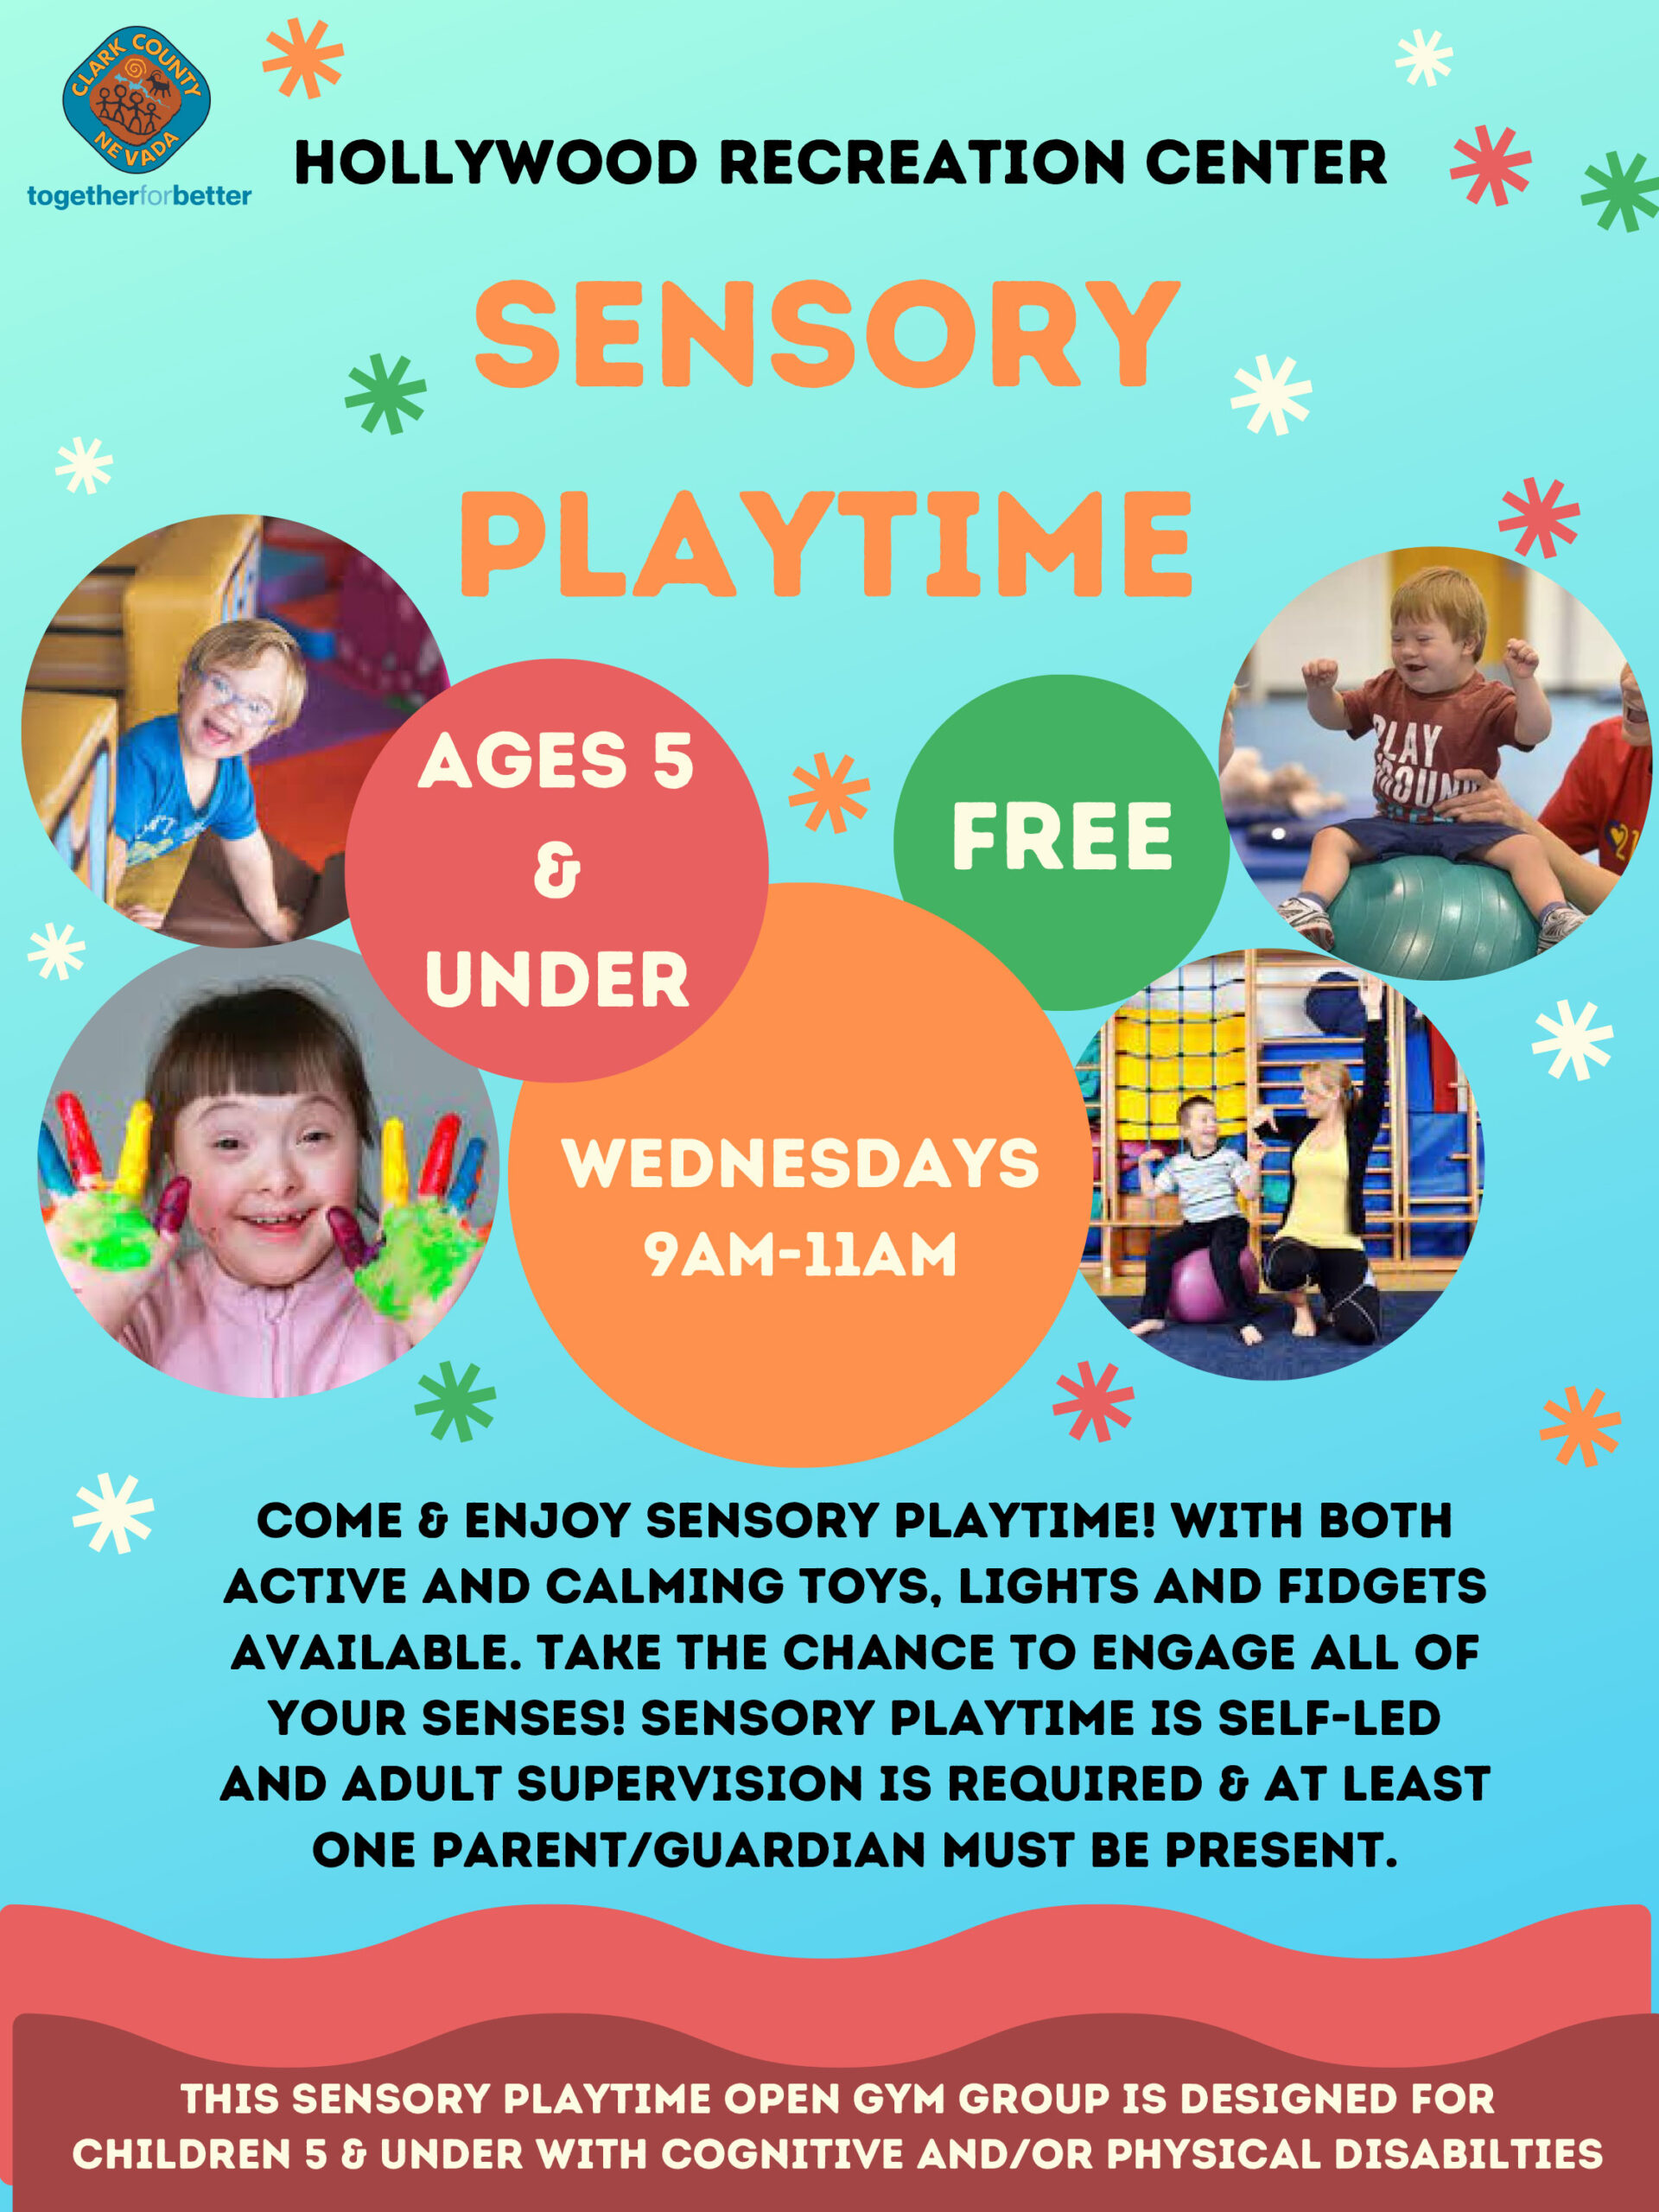 Sensory Playtime Ages 5 & under Wednesdays 9AM - 11AM Come and enjoy sensory playtime! With both active and calming toys, lights and fidgets available. Take the chance to engage all of your senses! Sensory playtime is self-lef and adult supervision is required and at least one parent / guardian must be present. This sensory playtime open gym group is designed for children 5 and under with cognitive and/or physical disabilities.